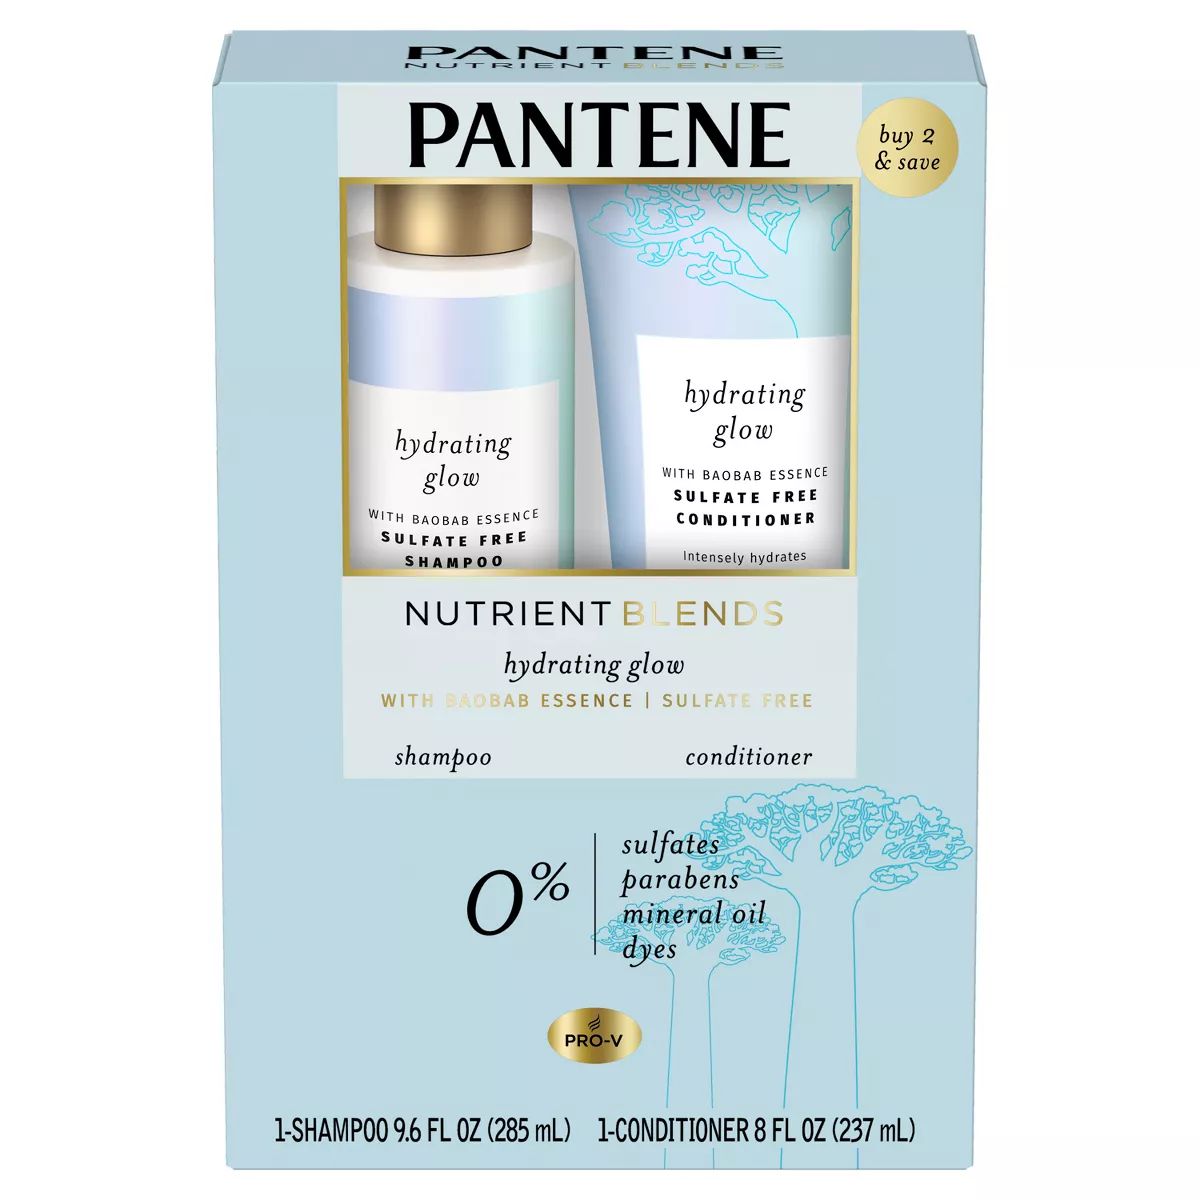 Pantene Sulfate Free Baobab Shampoo and Conditioner Dual Pack, Nutrient Blends - 17.6 fl oz | Target